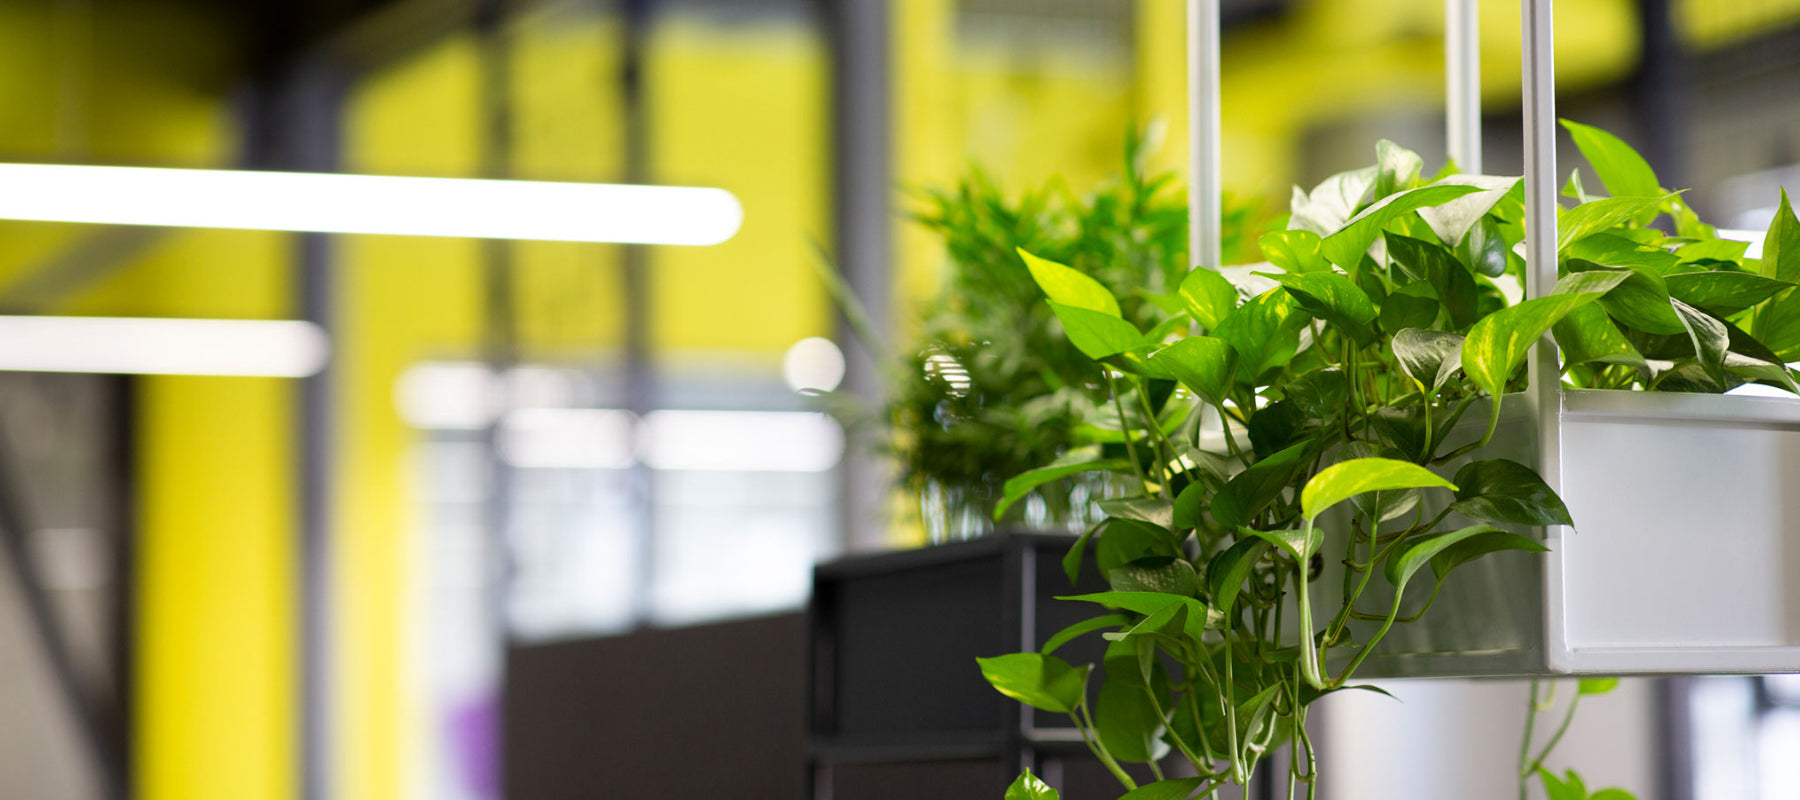 Workplace Wellness – The Benefits Of Indoor Plants On Health & Wellbeing